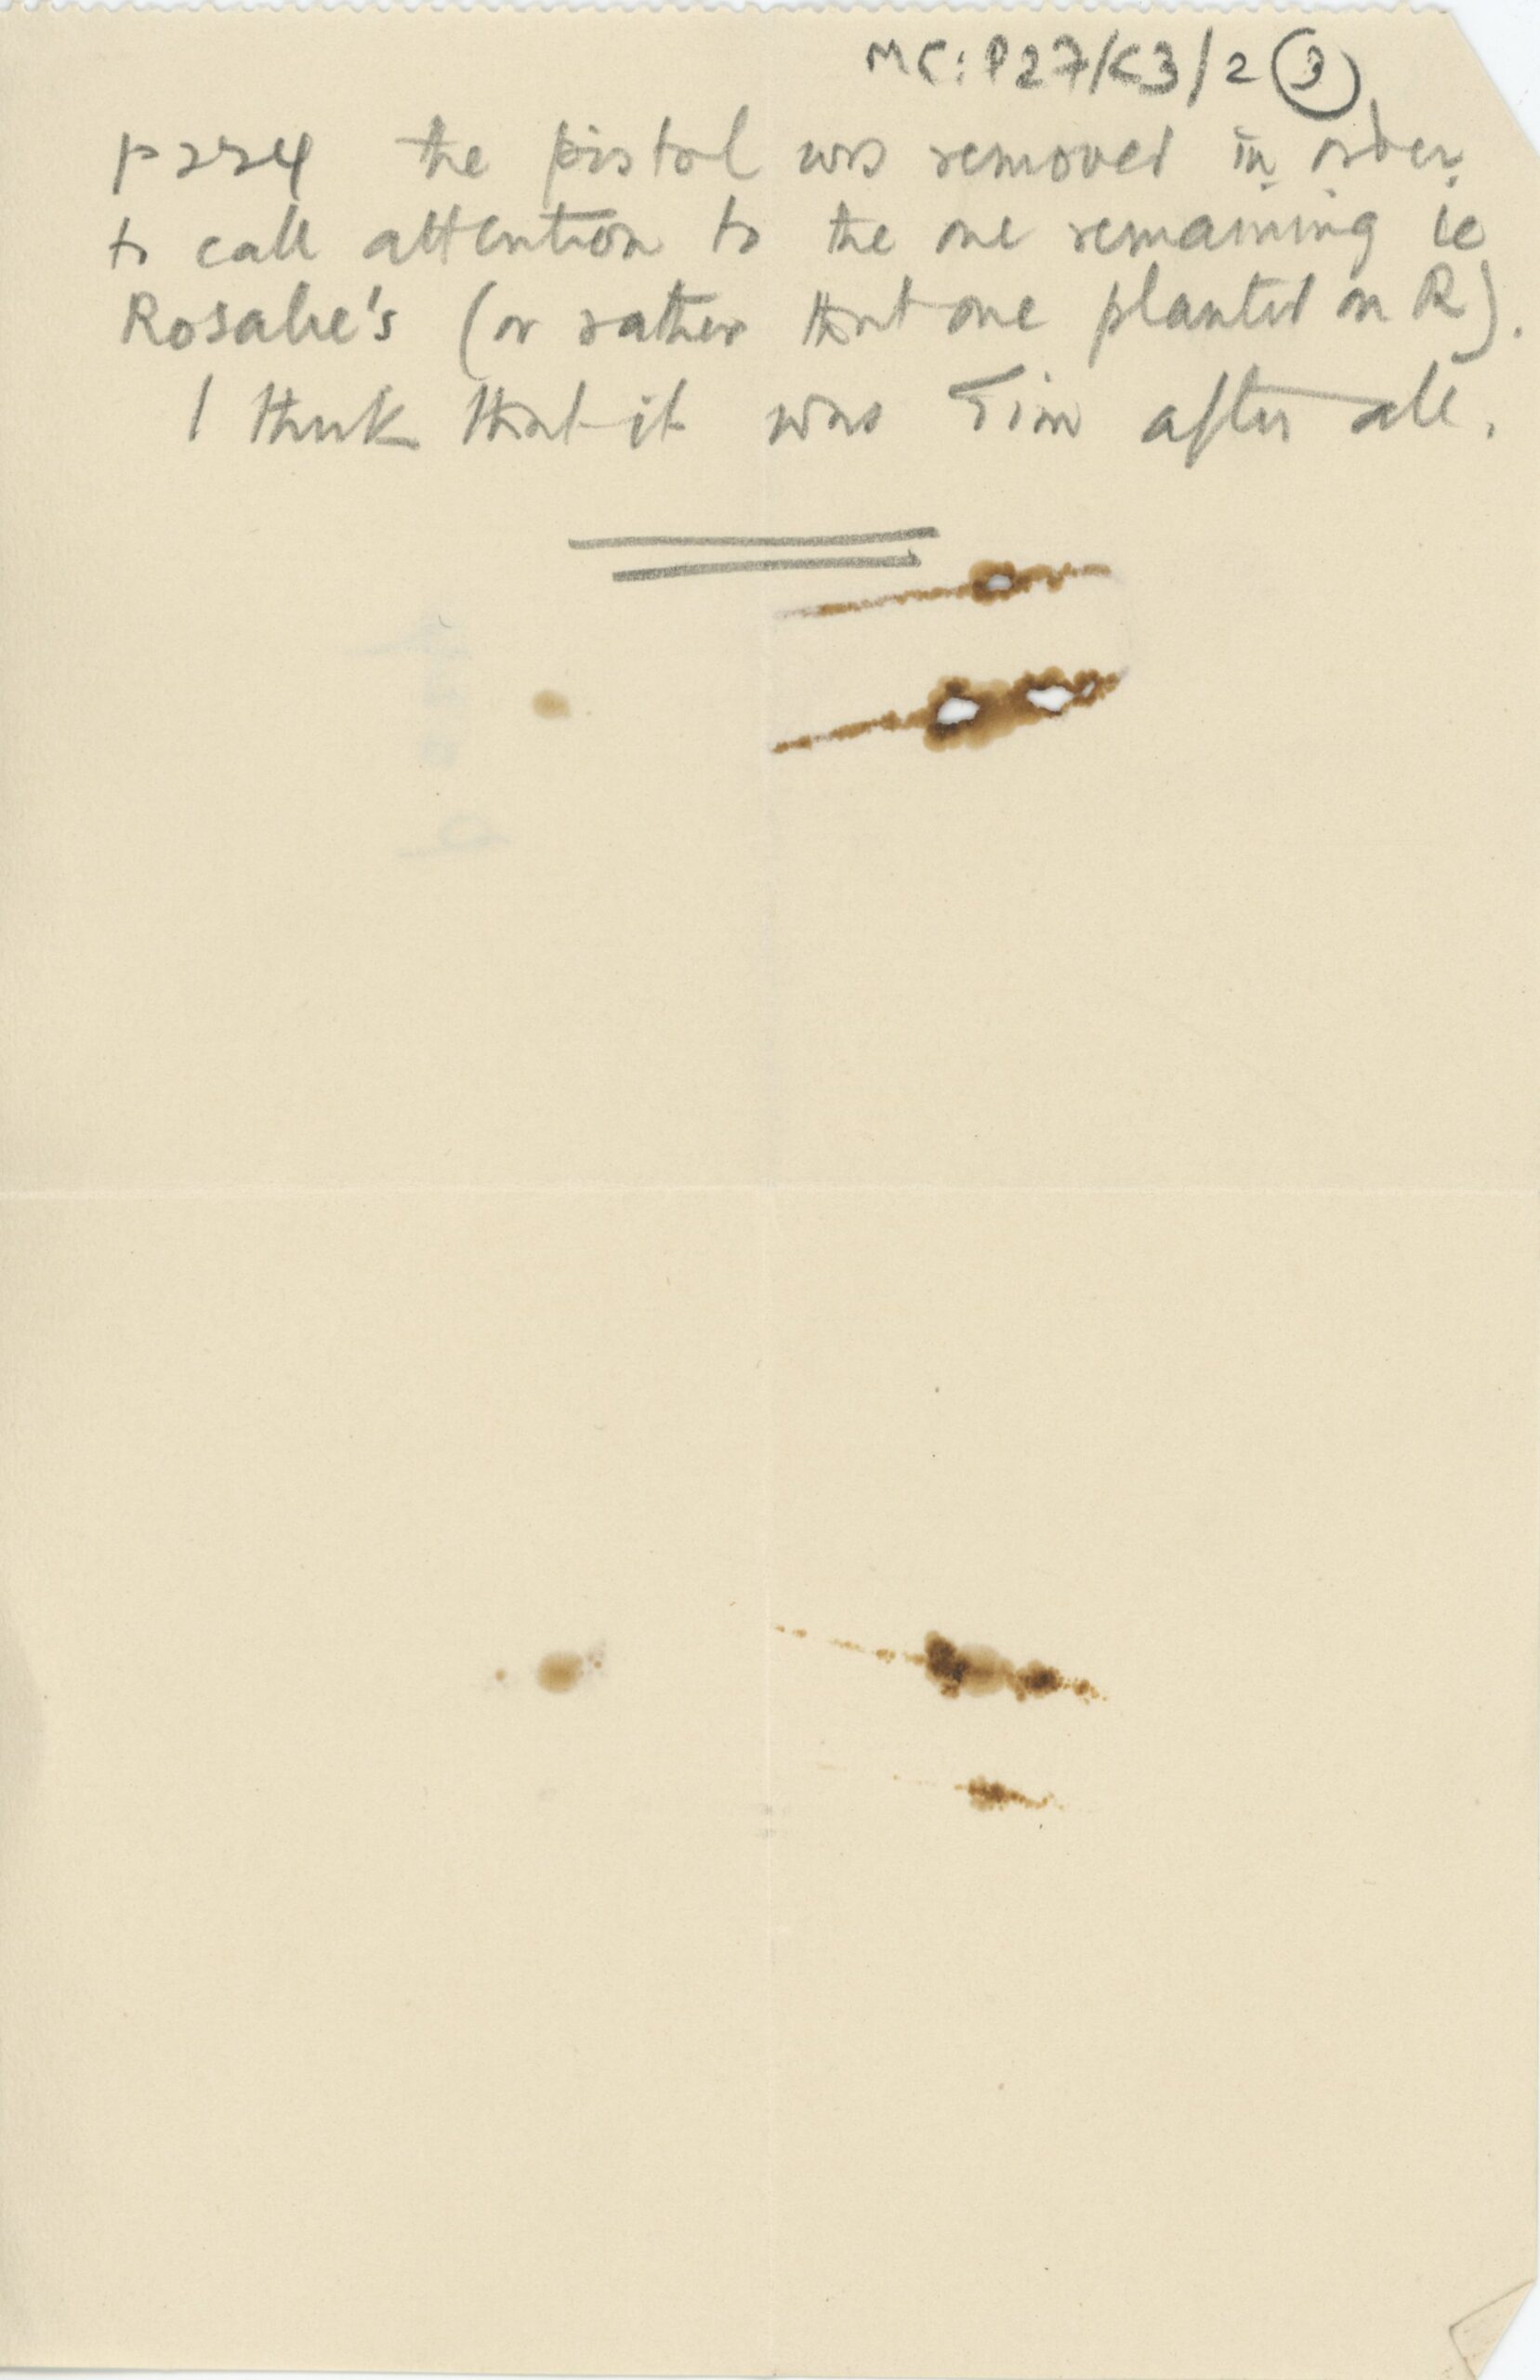 Small sheet of paper with handwritten notes in pencil. The text reads: p224 the pistol was removed in order to call attention to the one remaining i.e. Rosalie’s (or rather that one planted on R). I think that it was Tim after all.